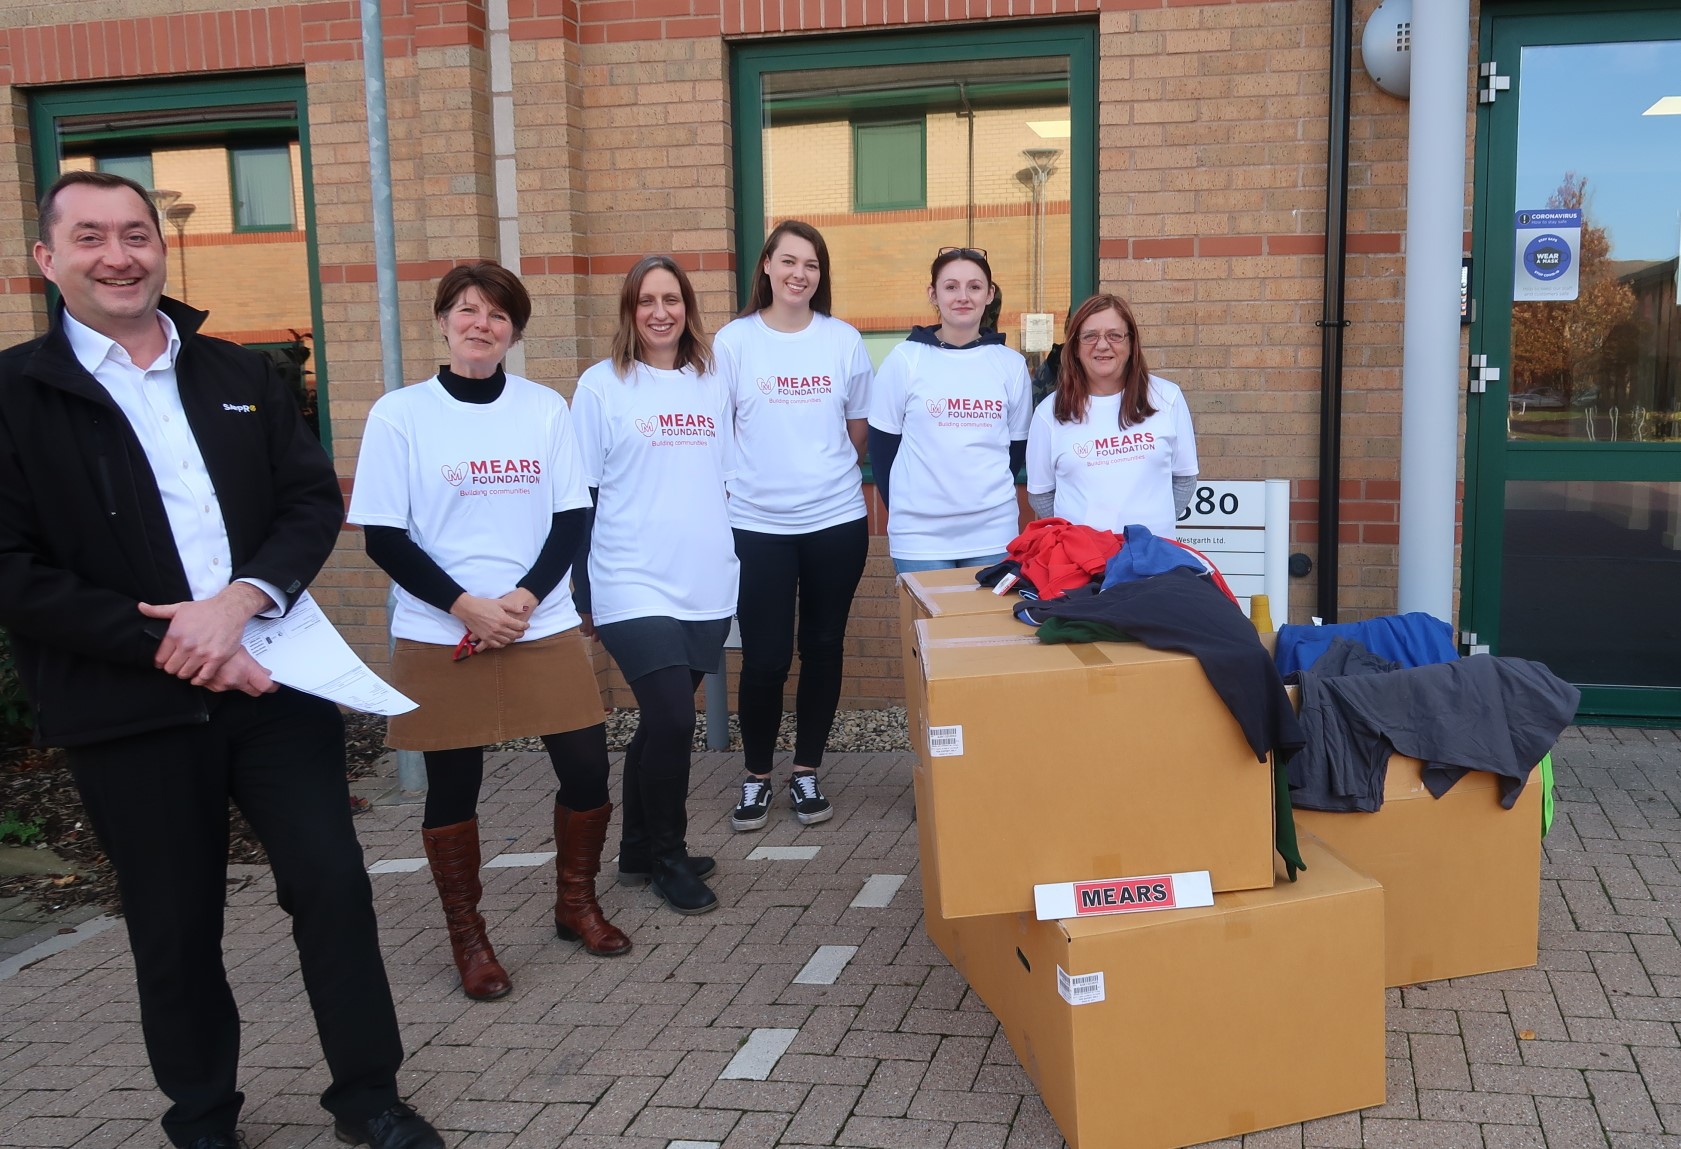 We  donated End of Line products to the Mears foundation. This clothing was to support the Mears Afghan Appeal as well as two homeless charities.